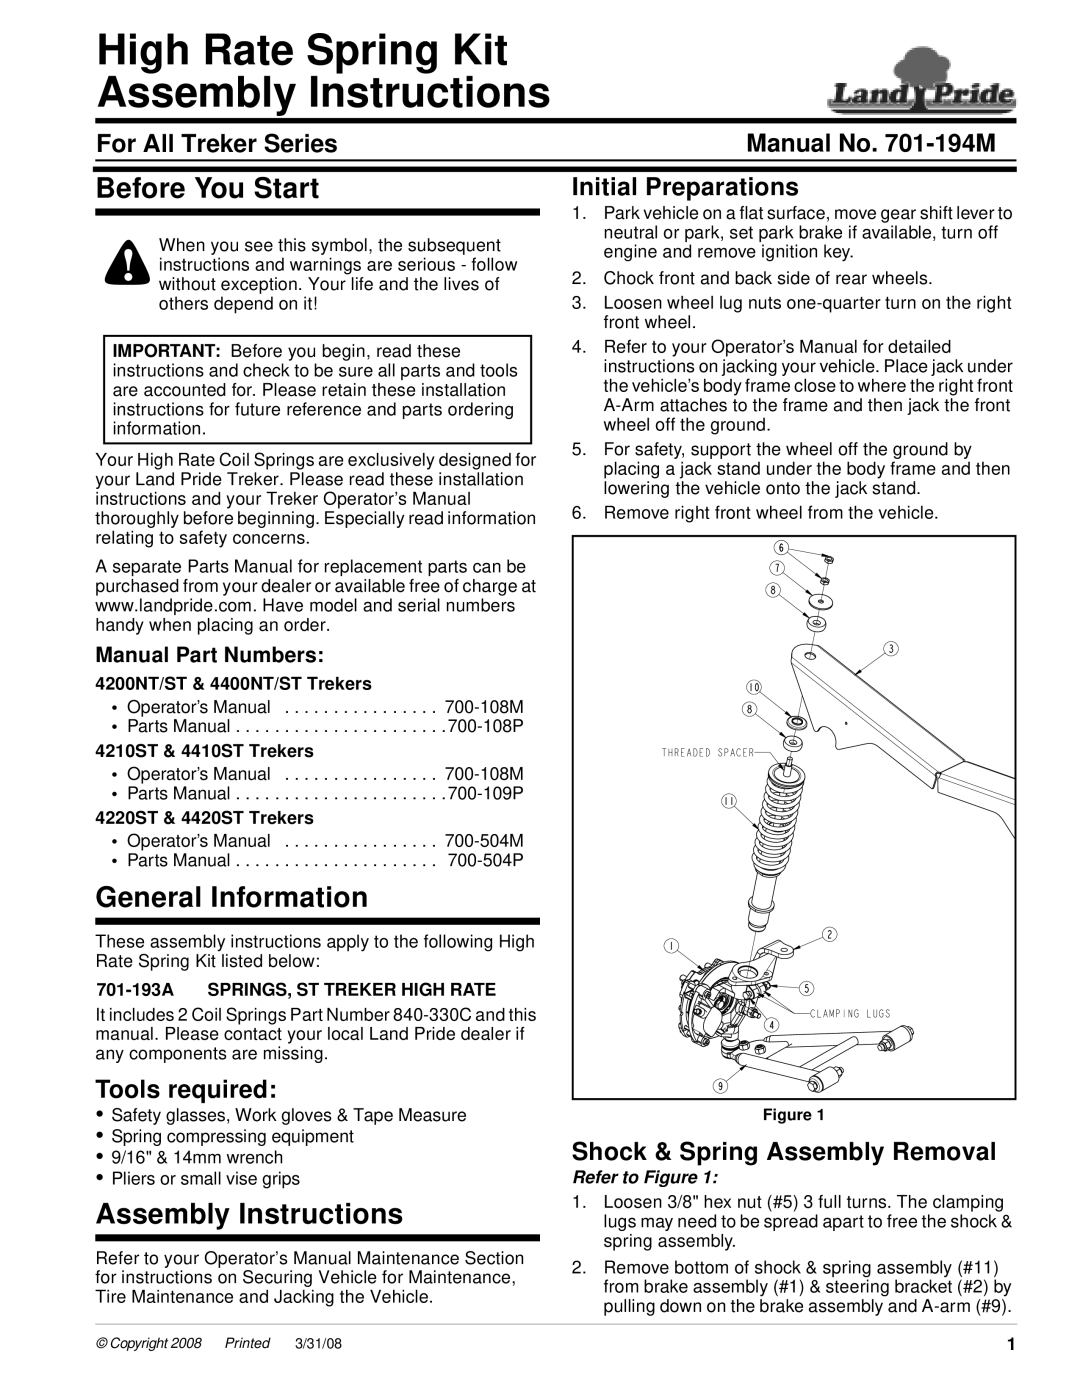 Land Pride ST installation instructions Before You Start, General Information, Assembly Instructions, Manual No. 701-194M 